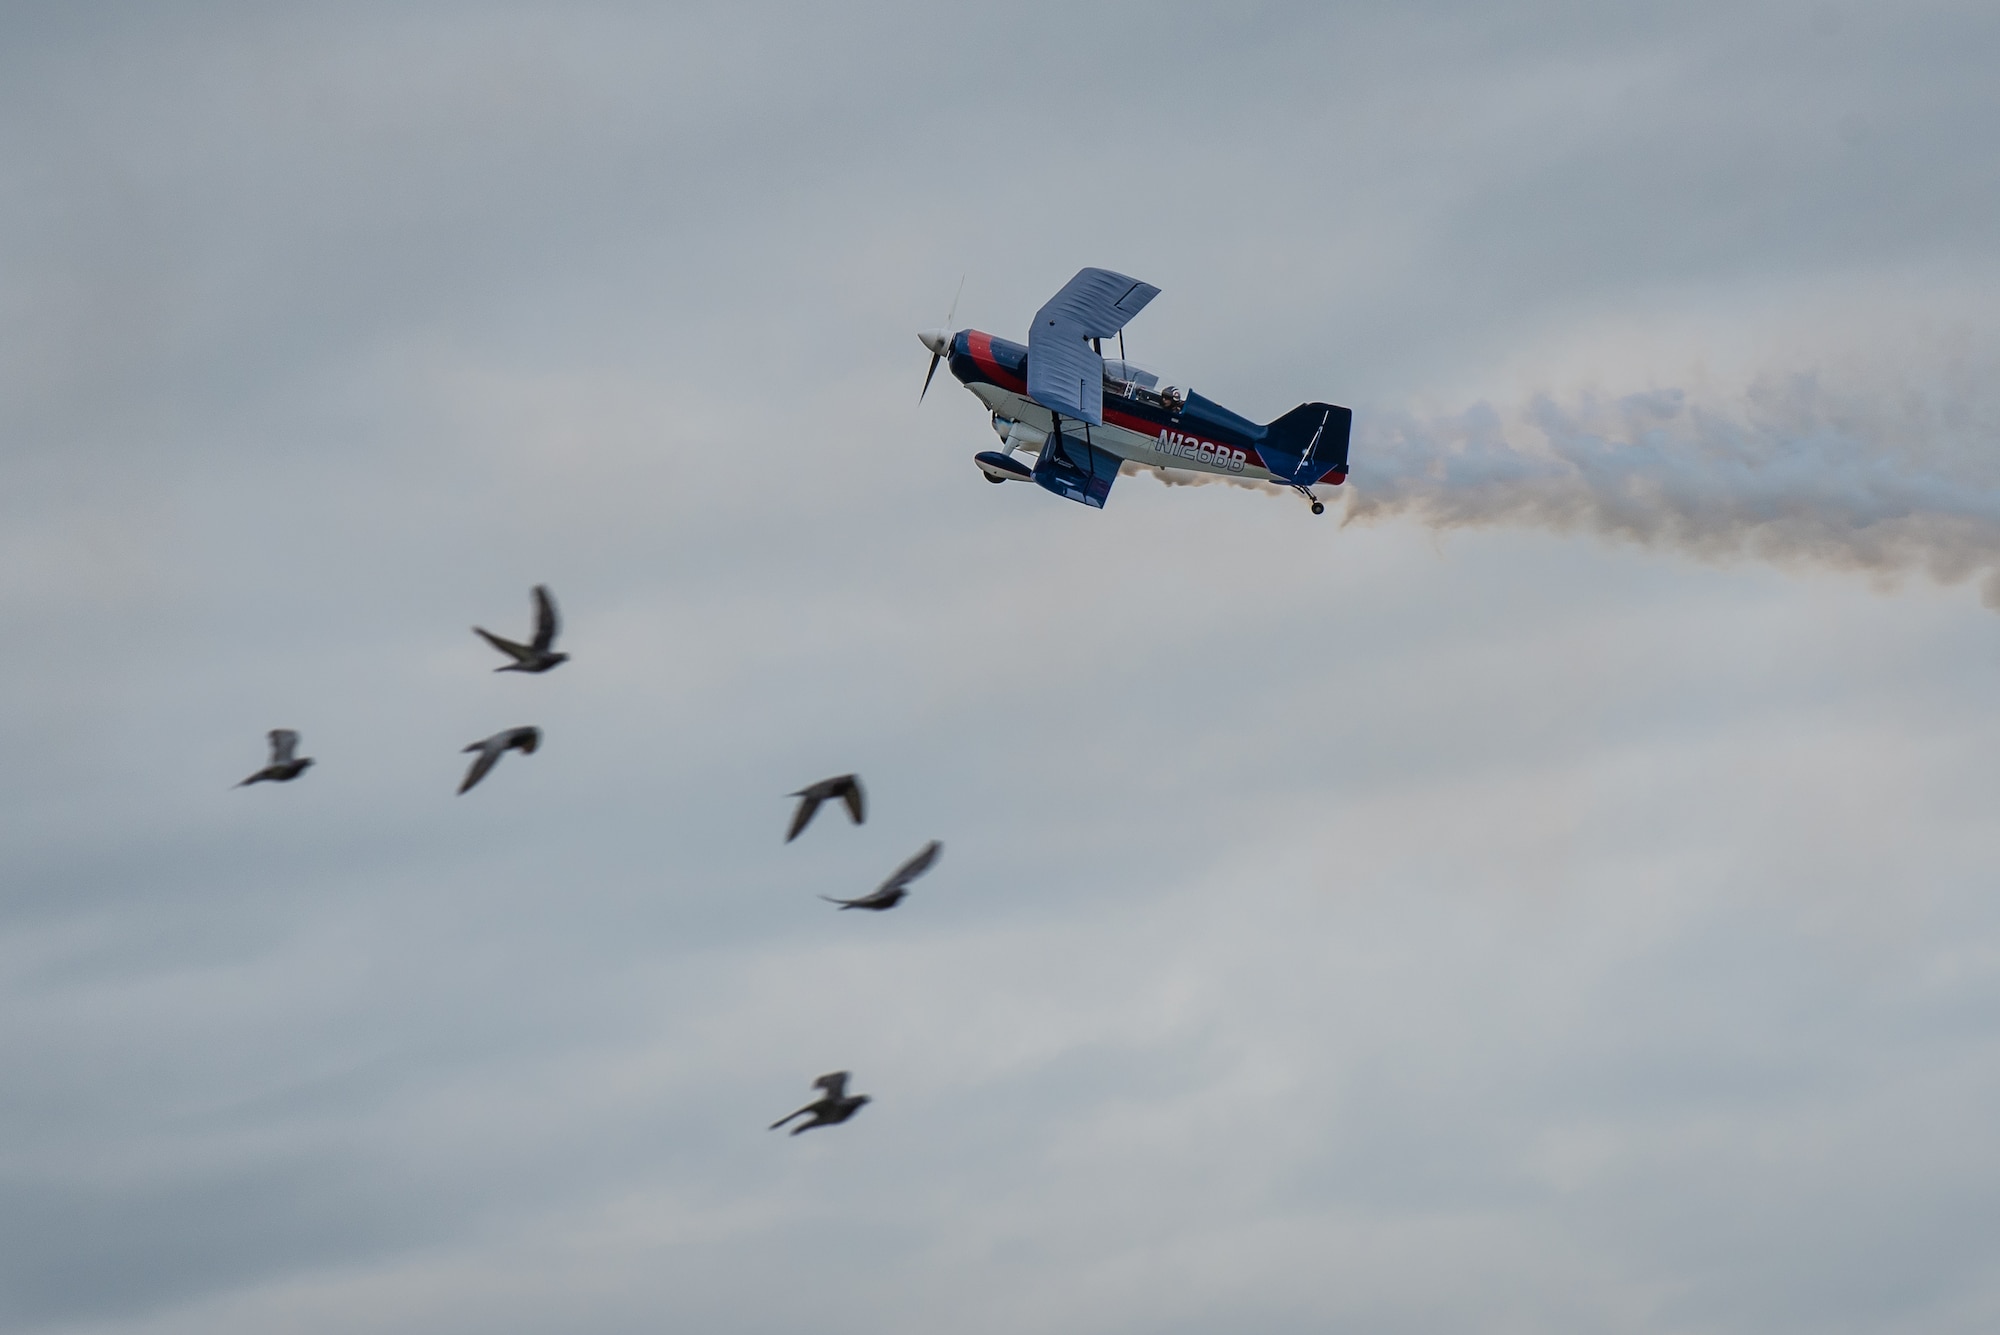 Billy Werth performs an aerial demonstration in his S-2C aircraft during the annual Thunder Over Louisville airshow in Louisville, Ky., April 13, 2019. Hundreds of thousands of spectators turned out to view the event, which has grown to become one of the largest single-day air shows in North America. (U.S. Air National Guard photo by Dale Greer)